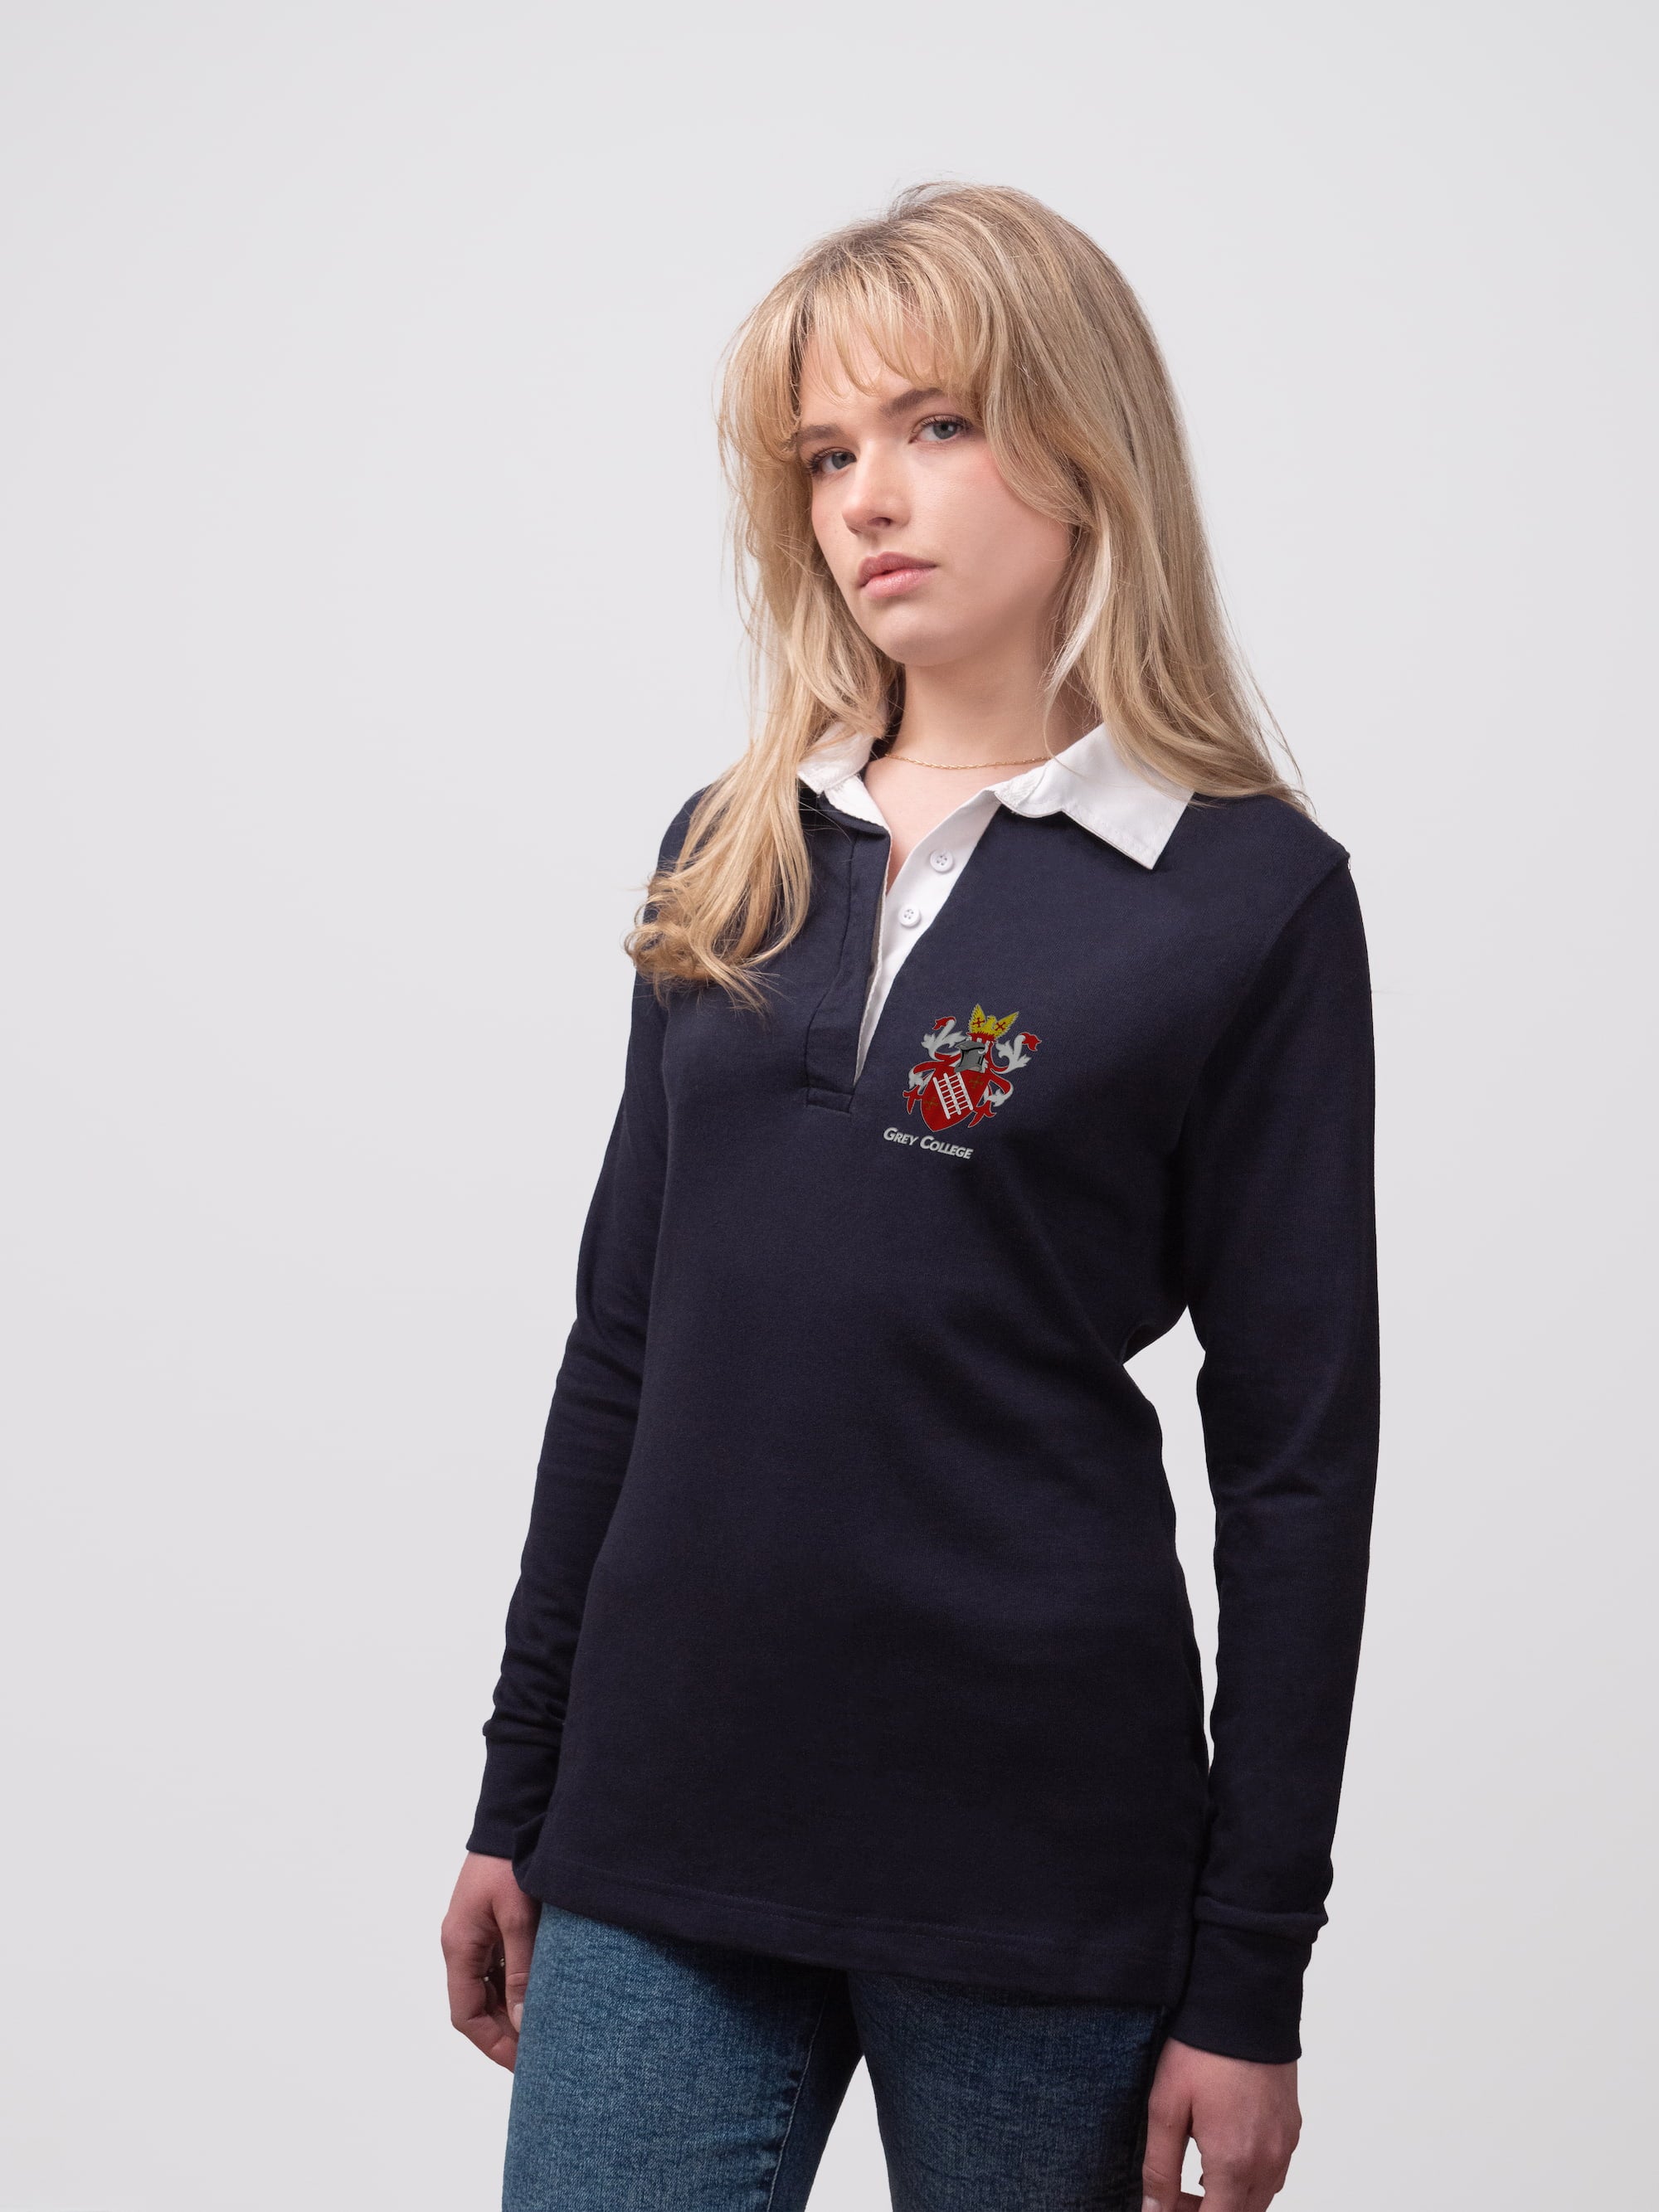 Student wearing a navy Grey College rugby shirt with embroidered crest